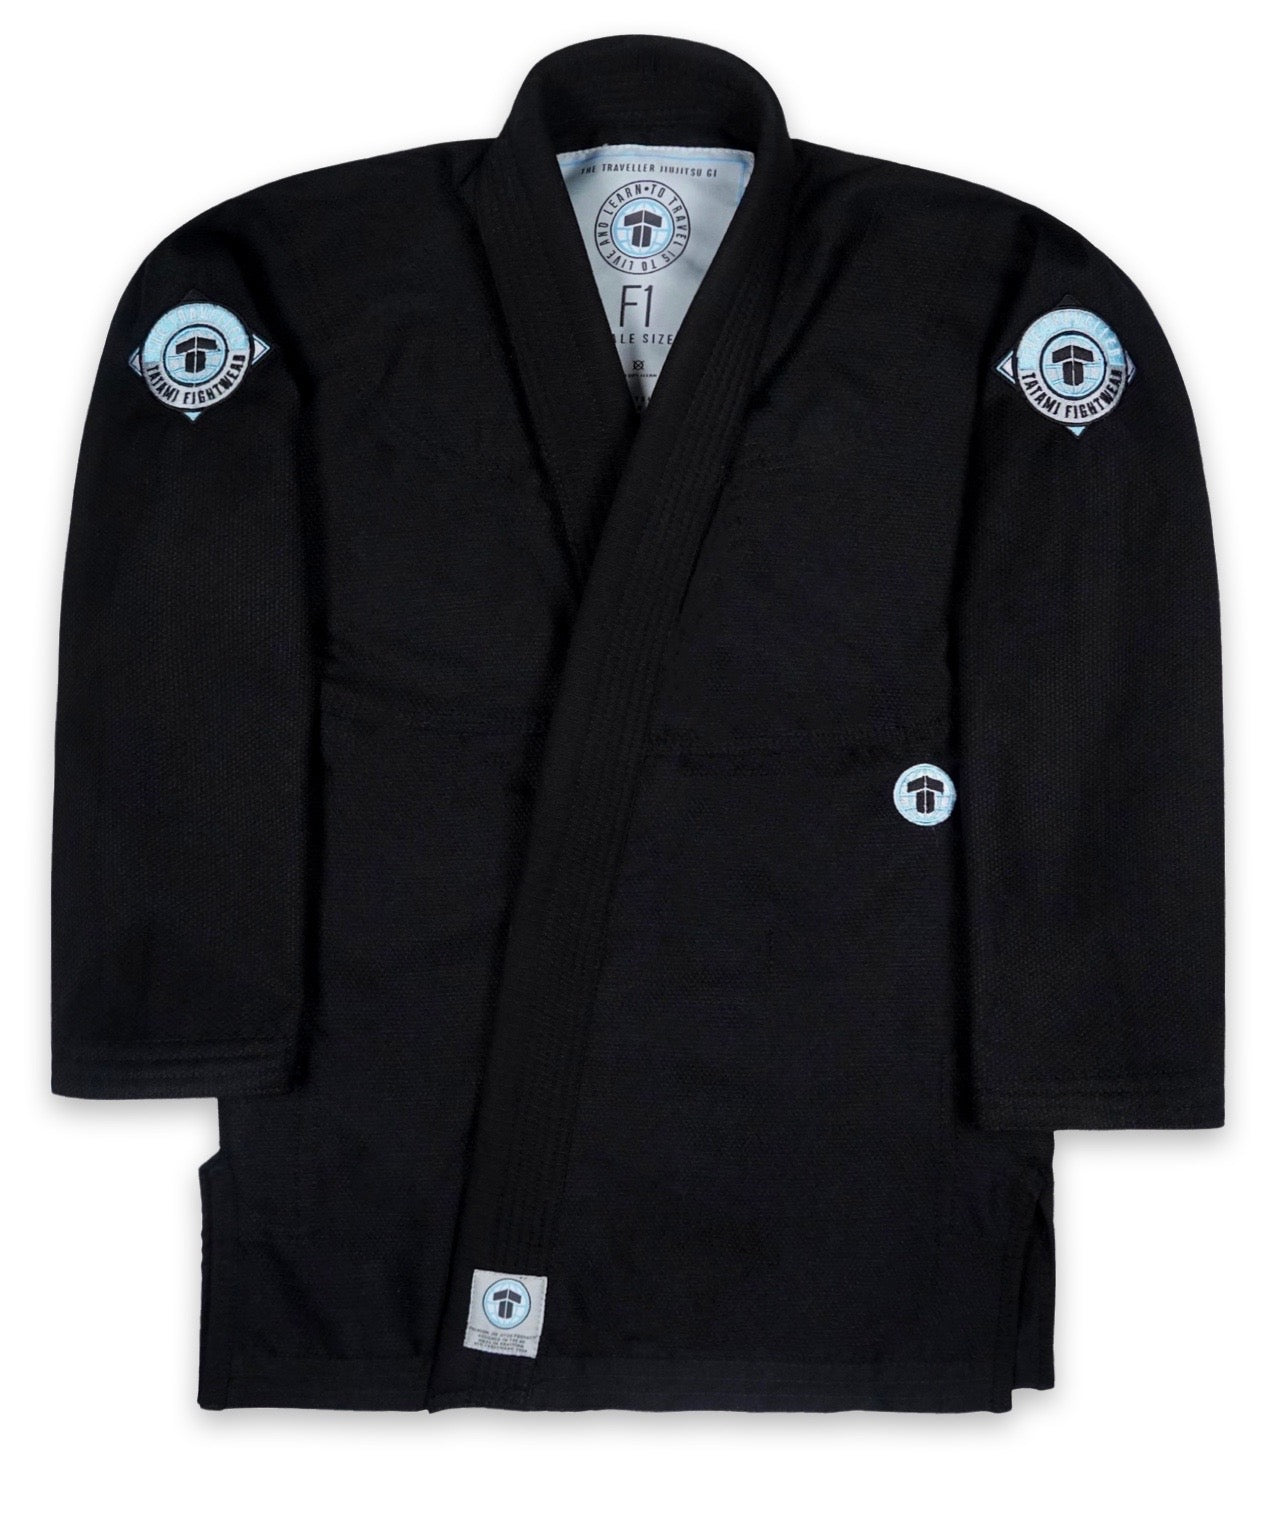 Ladies Collection | All Products | Tatami Fightwear USA